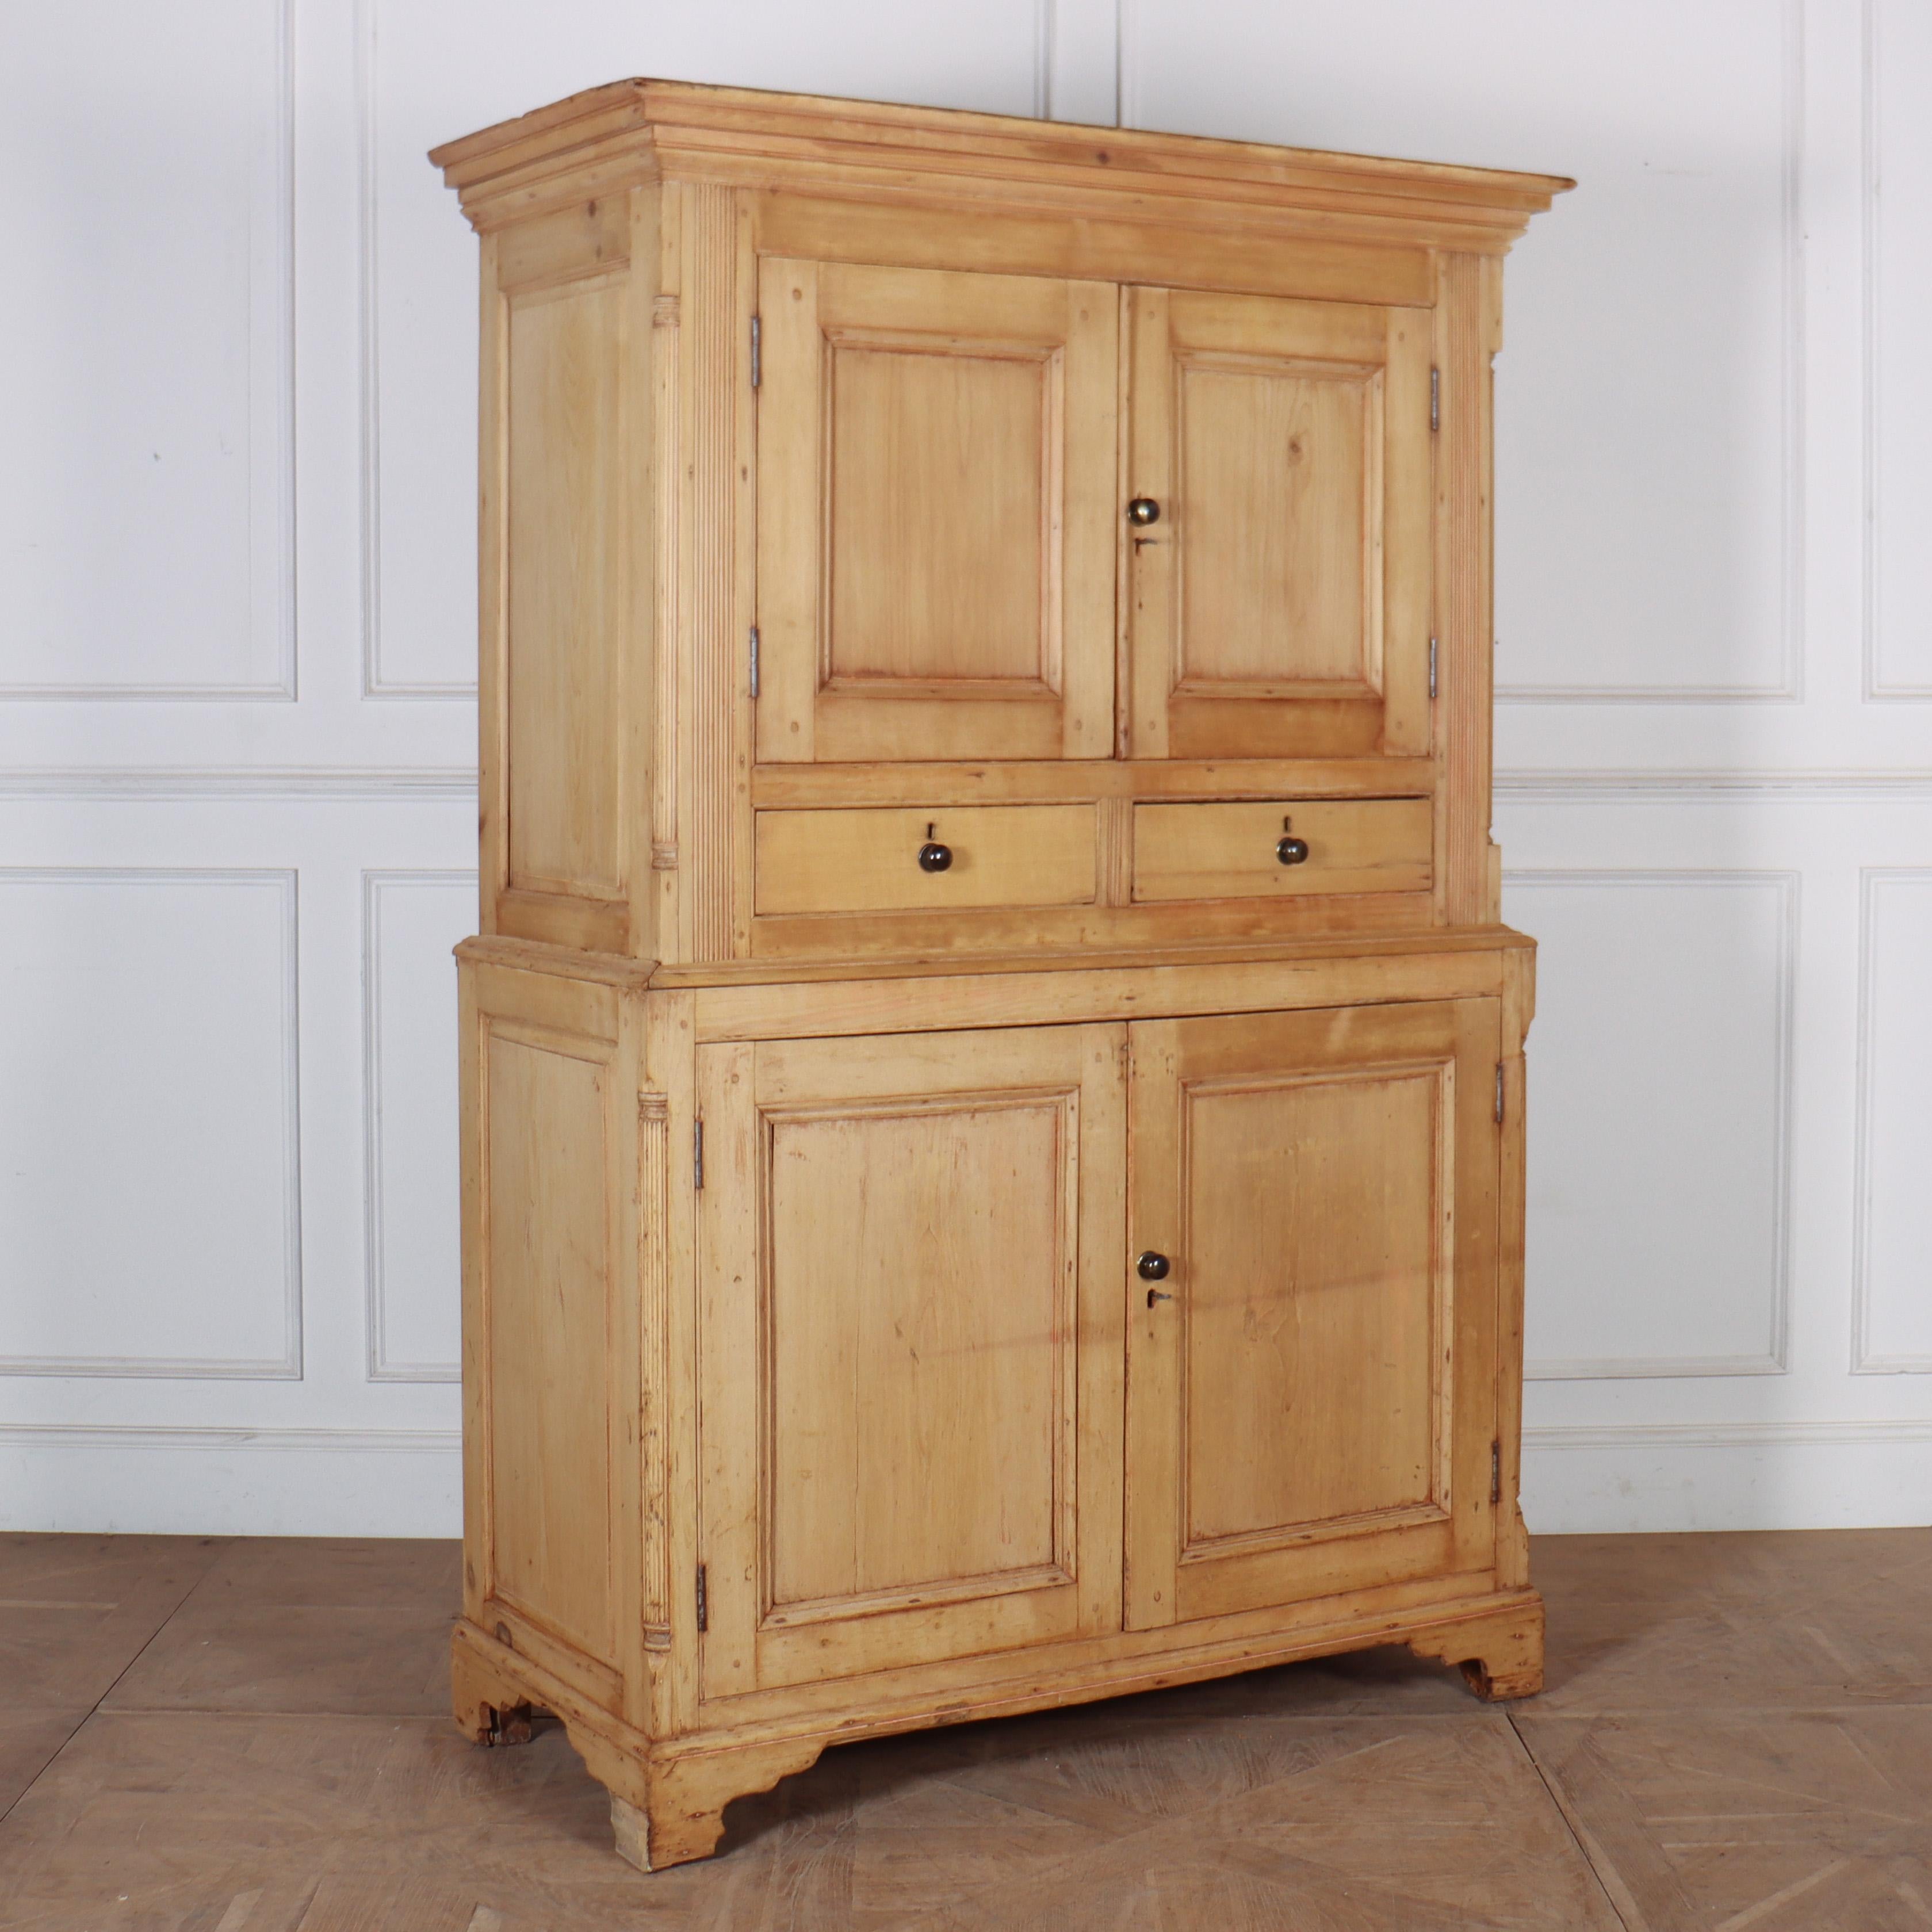 18th Century Scottish Linen Cupboard In Good Condition For Sale In Leamington Spa, Warwickshire